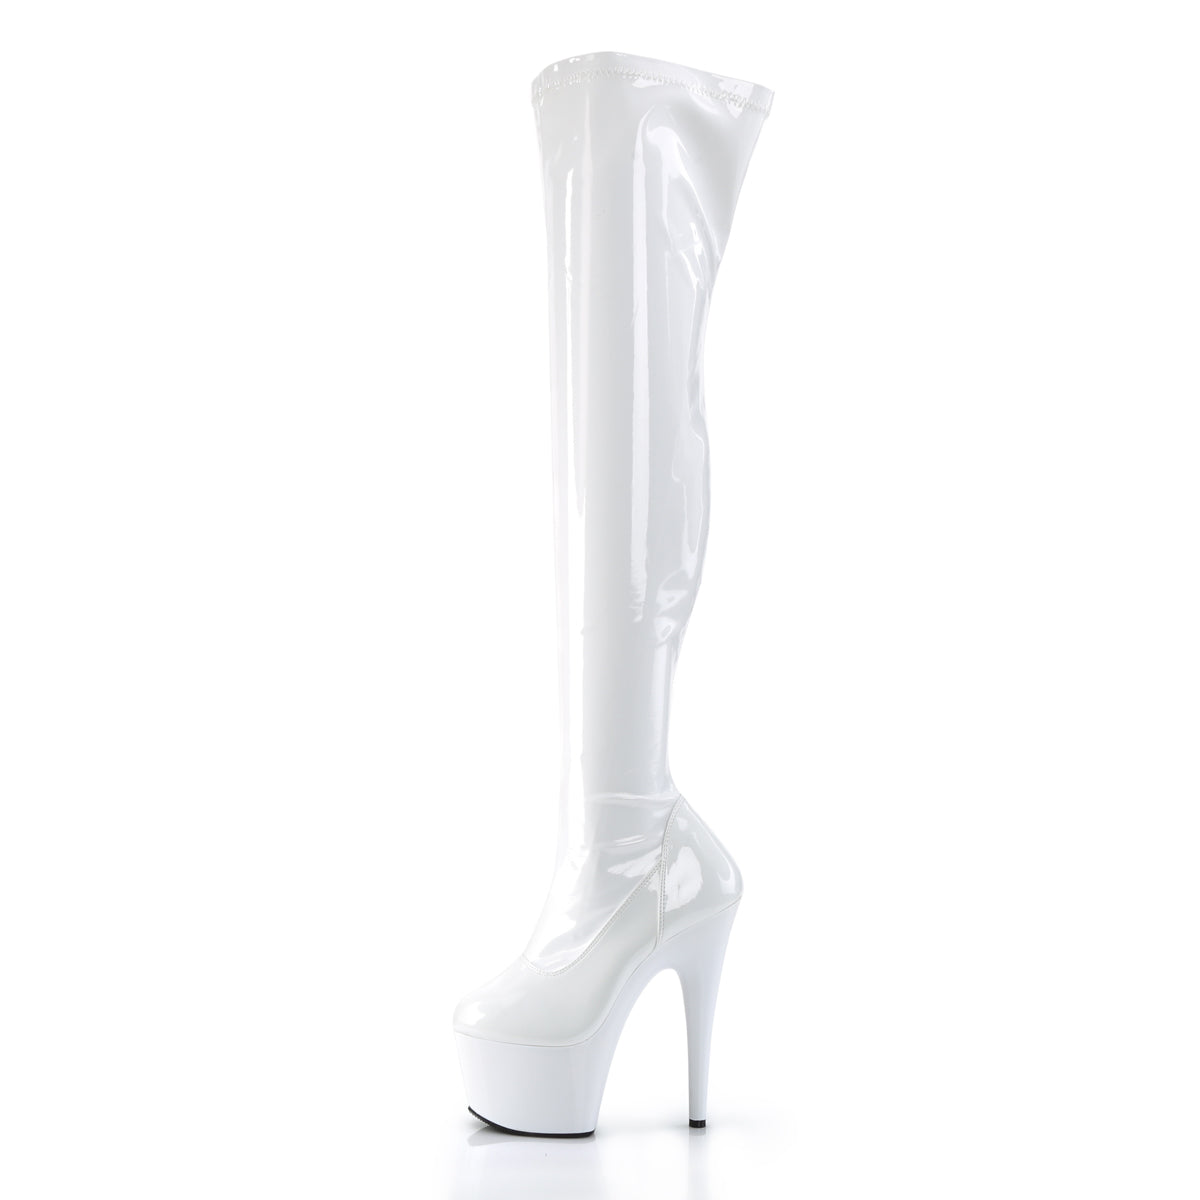 ADORE-3000 7 Inch Heel White Patent Pole Dancing Thigh Highs-Pleaser- Sexy Shoes Pole Dance Heels